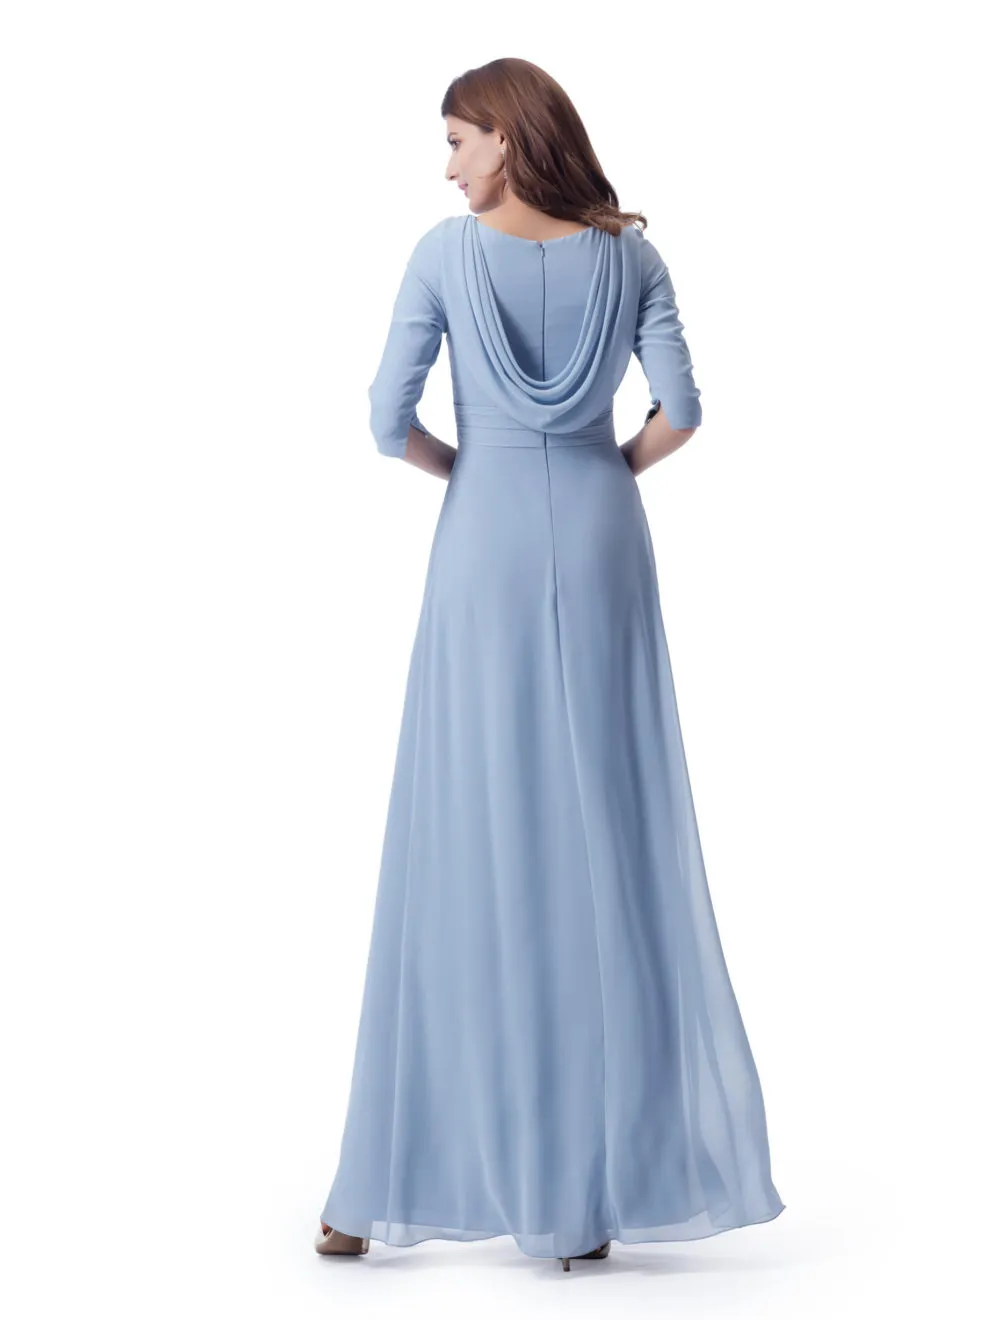 Pastal Blue Long Modest Bridesmaid Dresses With 34 Sleeves Ruched Chiffon Ankle Length Formal Wedding Party Dresses LDS Maids Of Honor Dress